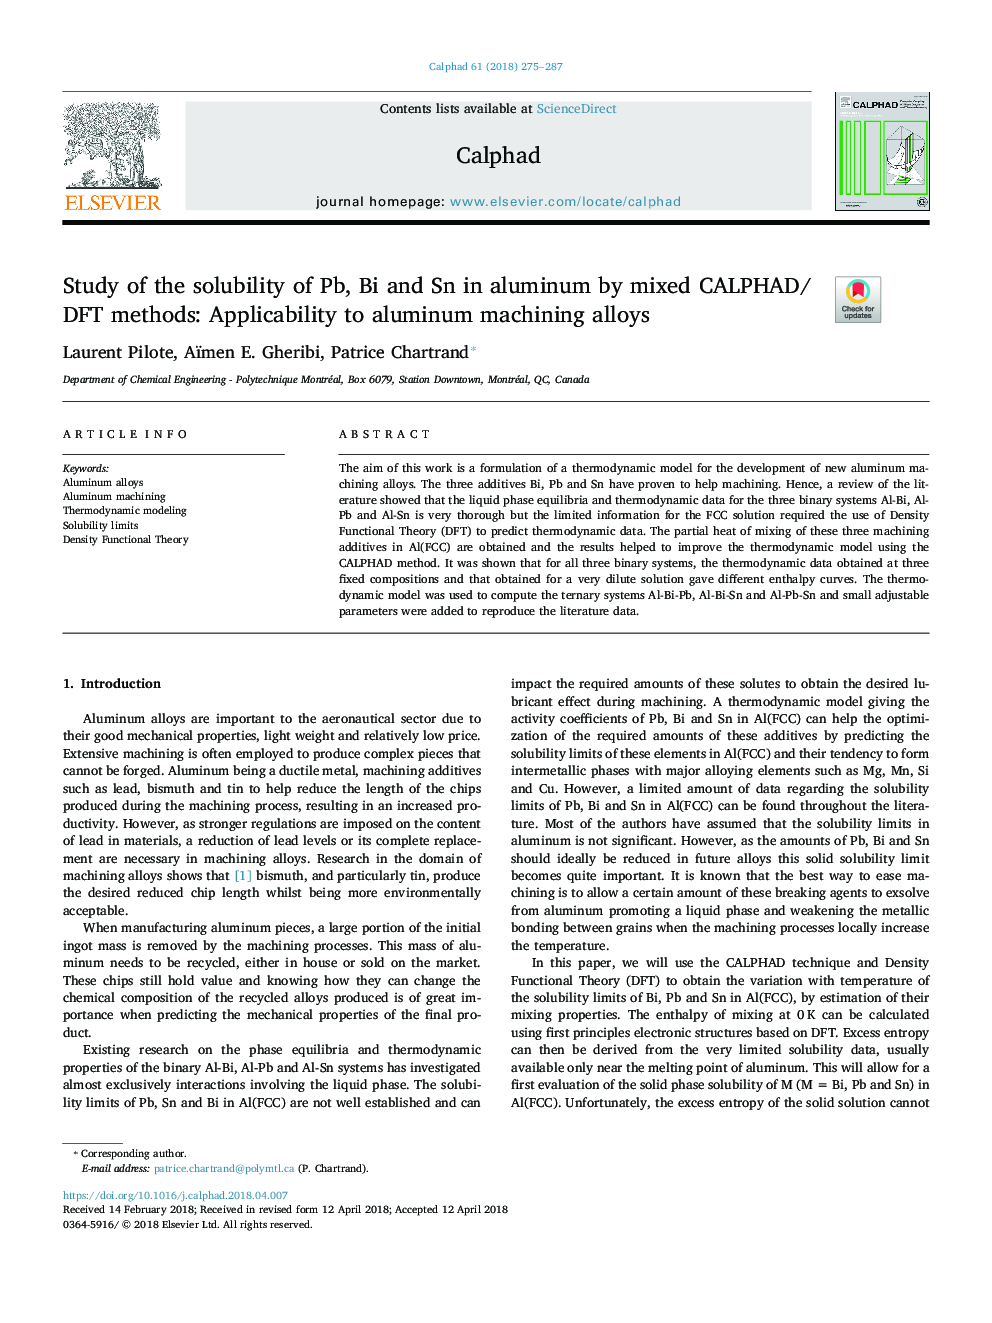 Study of the solubility of Pb, Bi and Sn in aluminum by mixed CALPHAD/DFT methods: Applicability to aluminum machining alloys